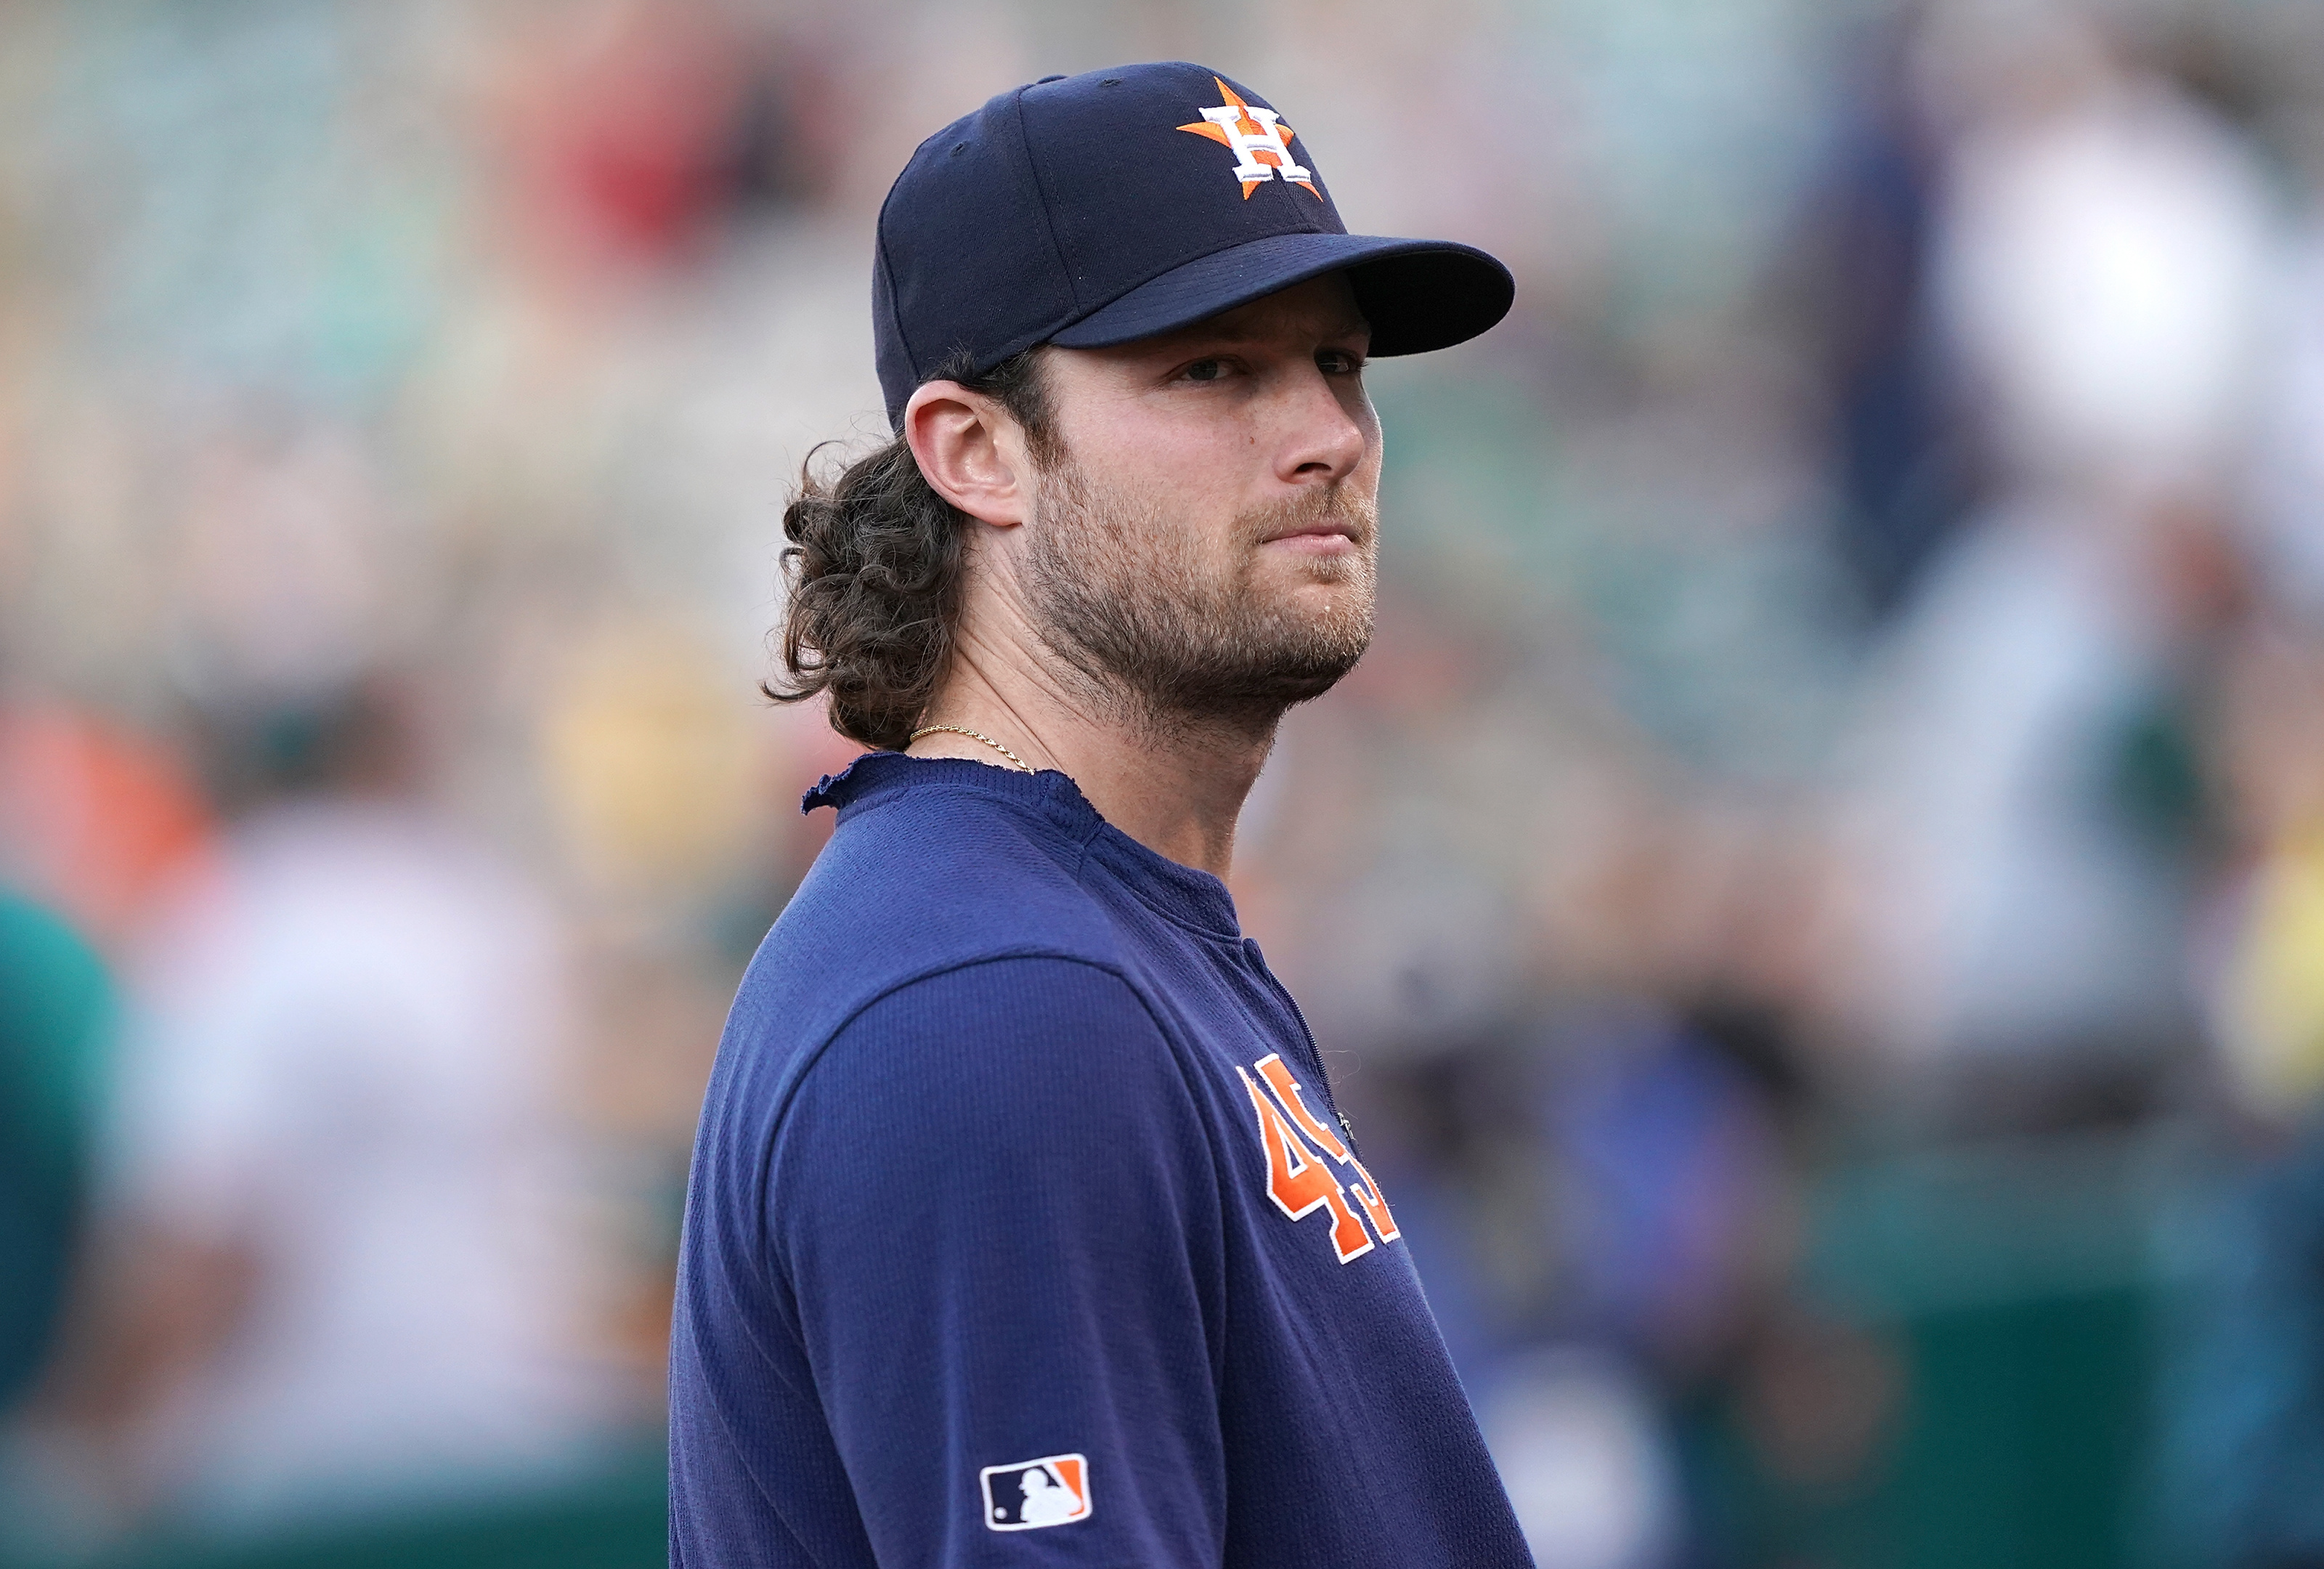 Houston Astros: Gerrit Cole needs to be ready to start Game 6 if necessary